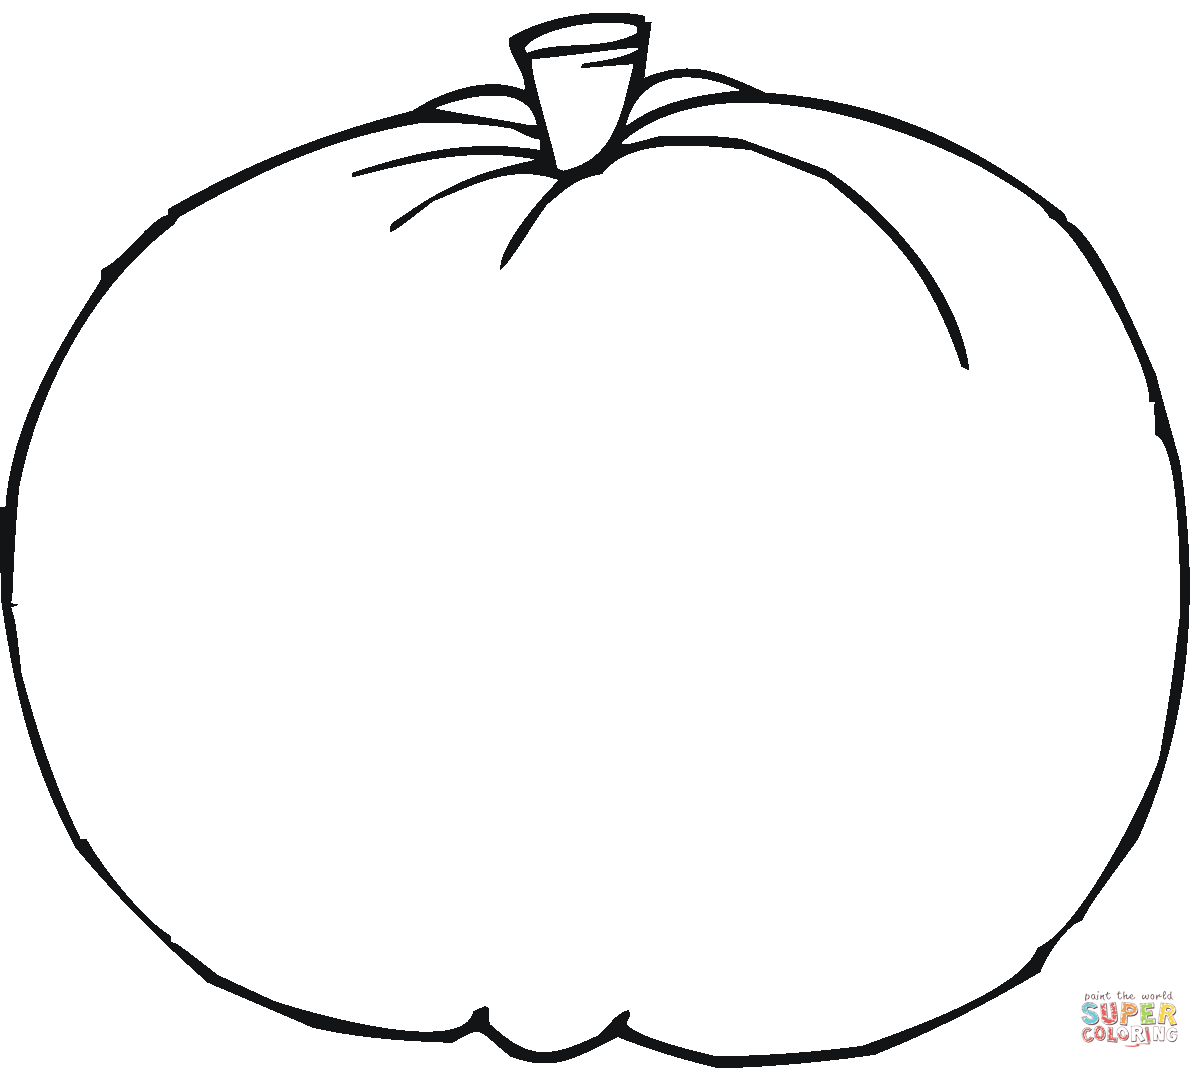 pumpkin coloring pages free printable best pumpkin outline printable 22943 clipartioncom coloring printable free pages pumpkin 